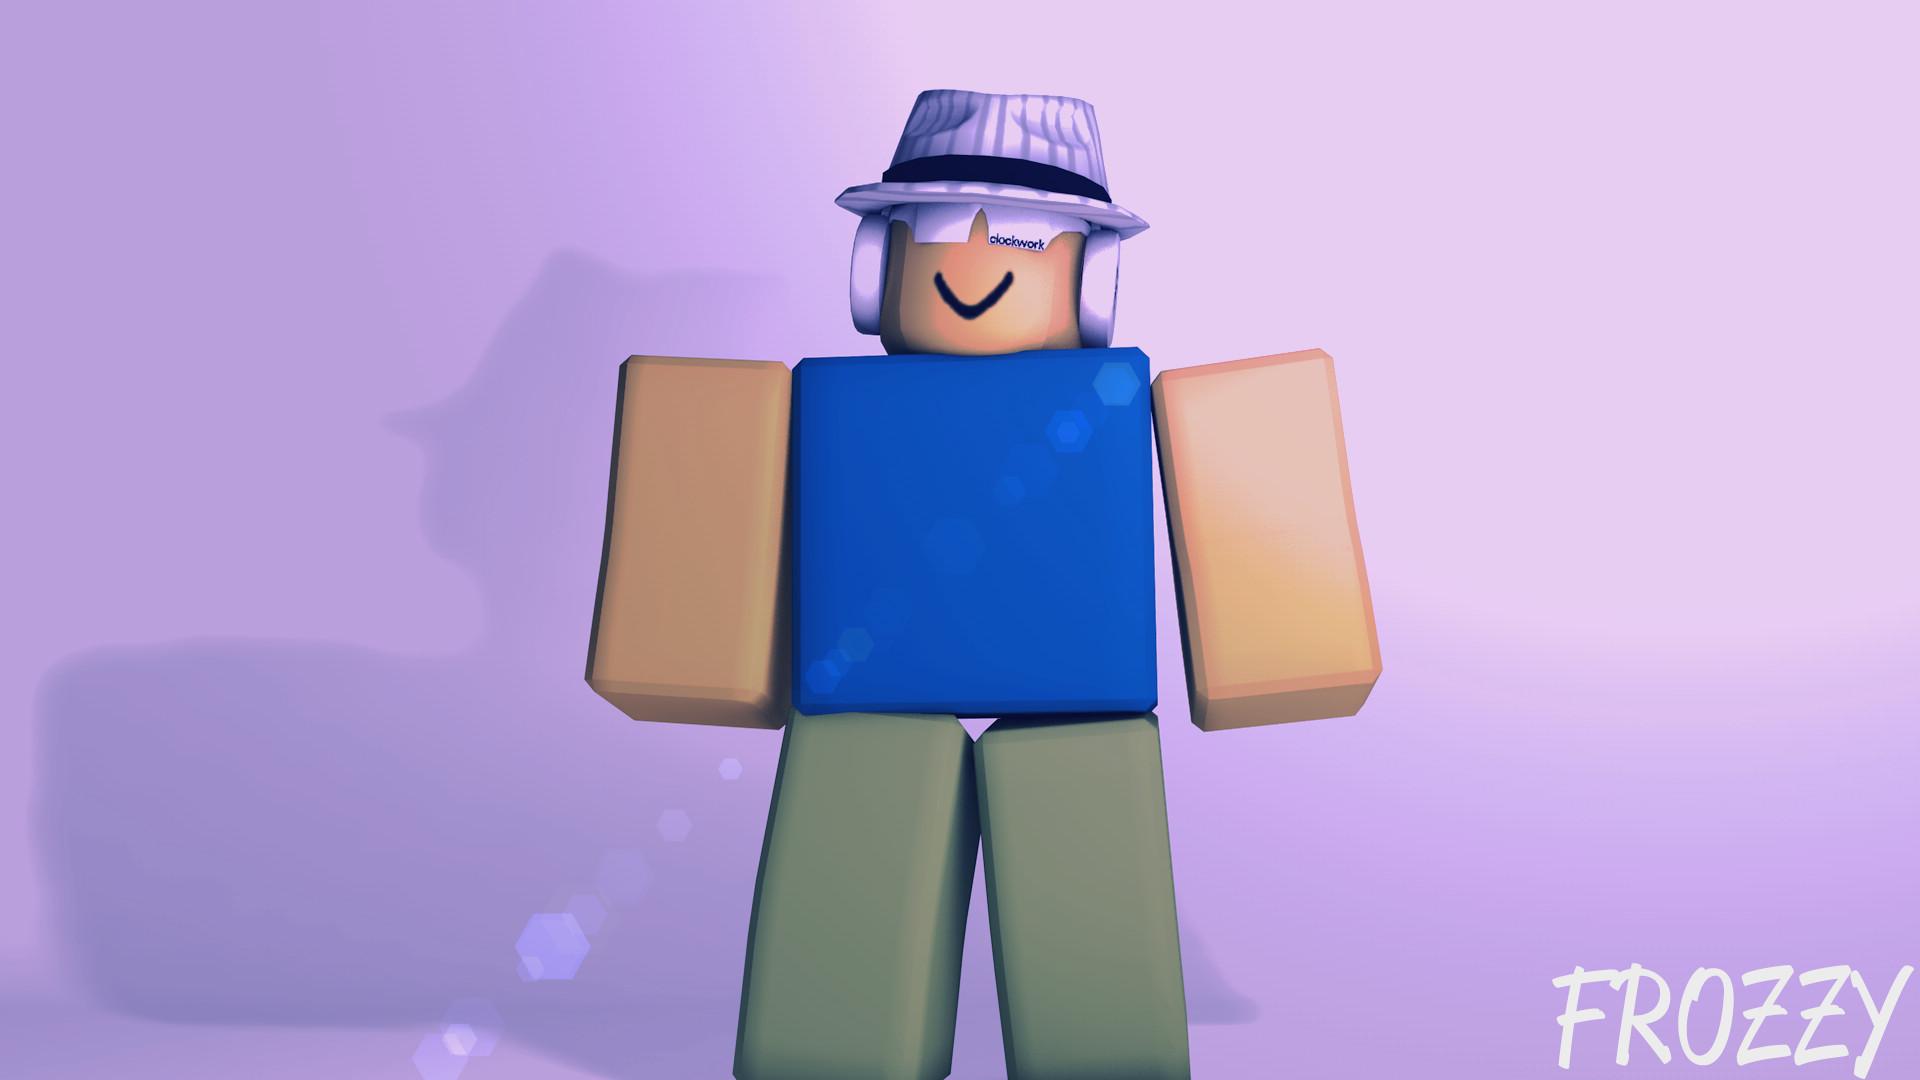 Roblox Noob Wallpapers Wallpaper Cave Free Robux Codes Promo